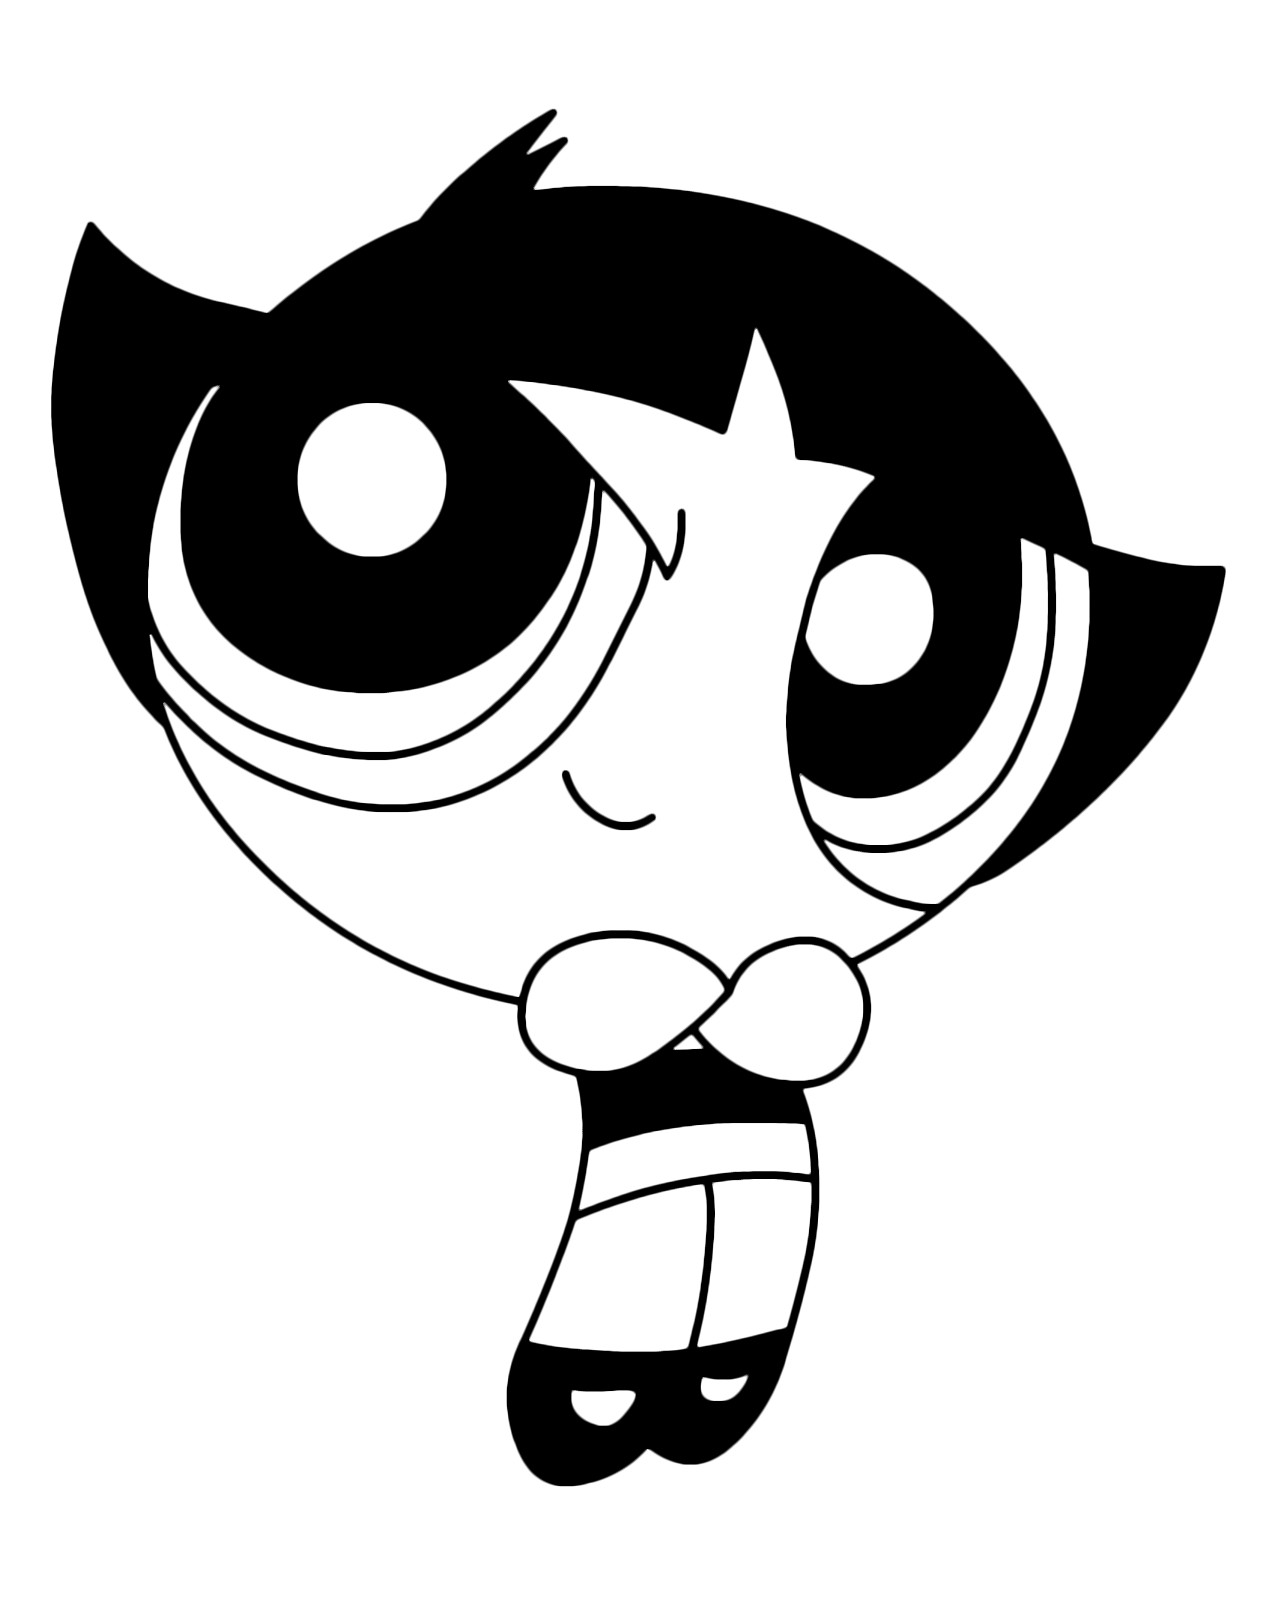 Powerpuff Girls Buttercup Coloring Pages
 The Powerpuff Girls Buttercup with crossed arms